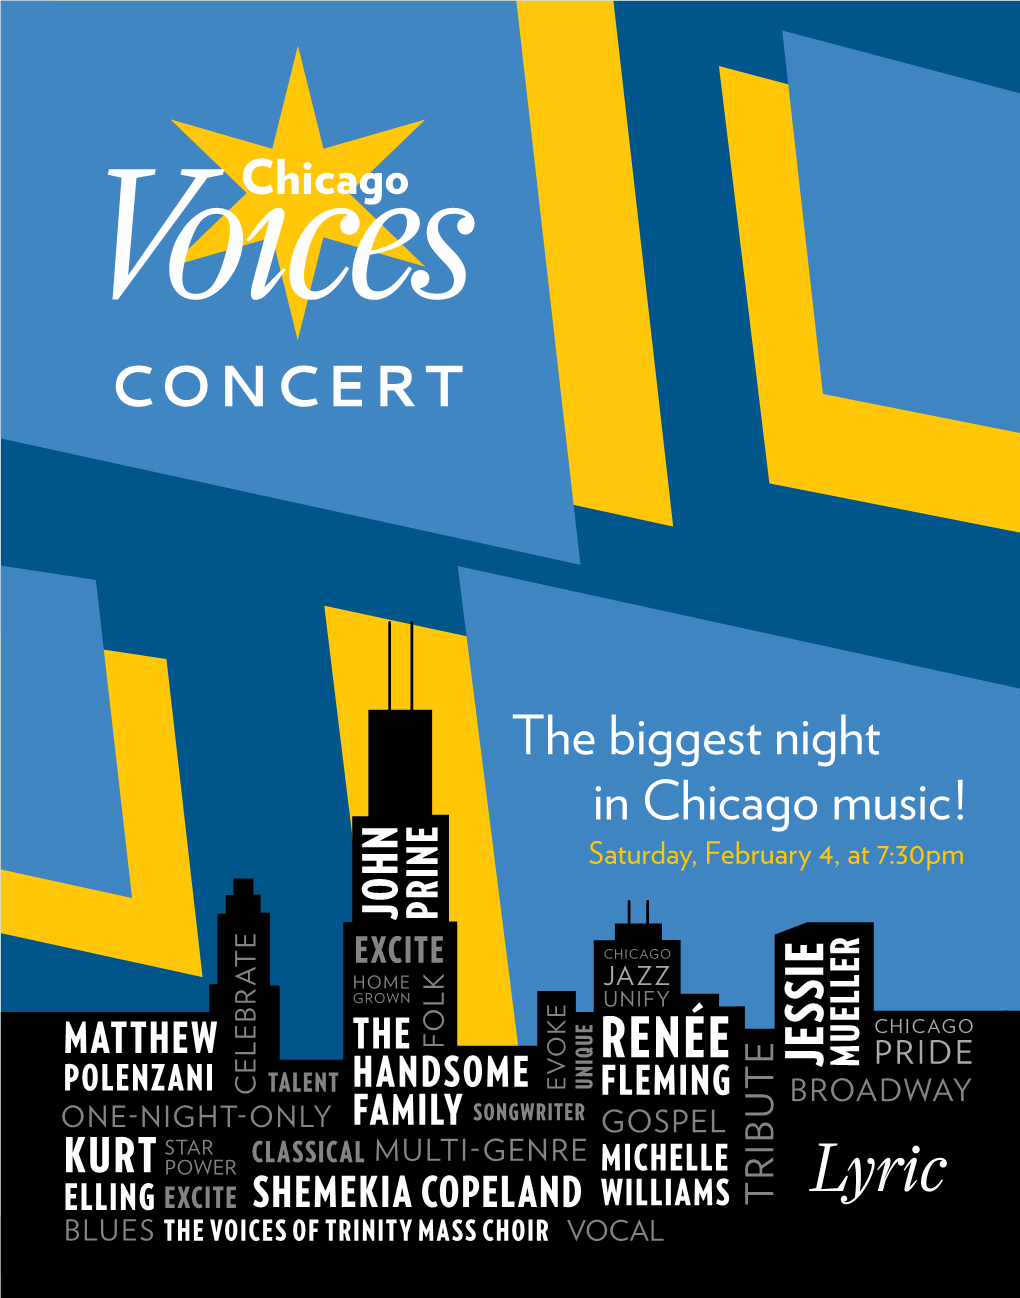 Chicago Voices Concert a Celebration of Vocal Music and Its Place in Chicago’S Rich Cultural History